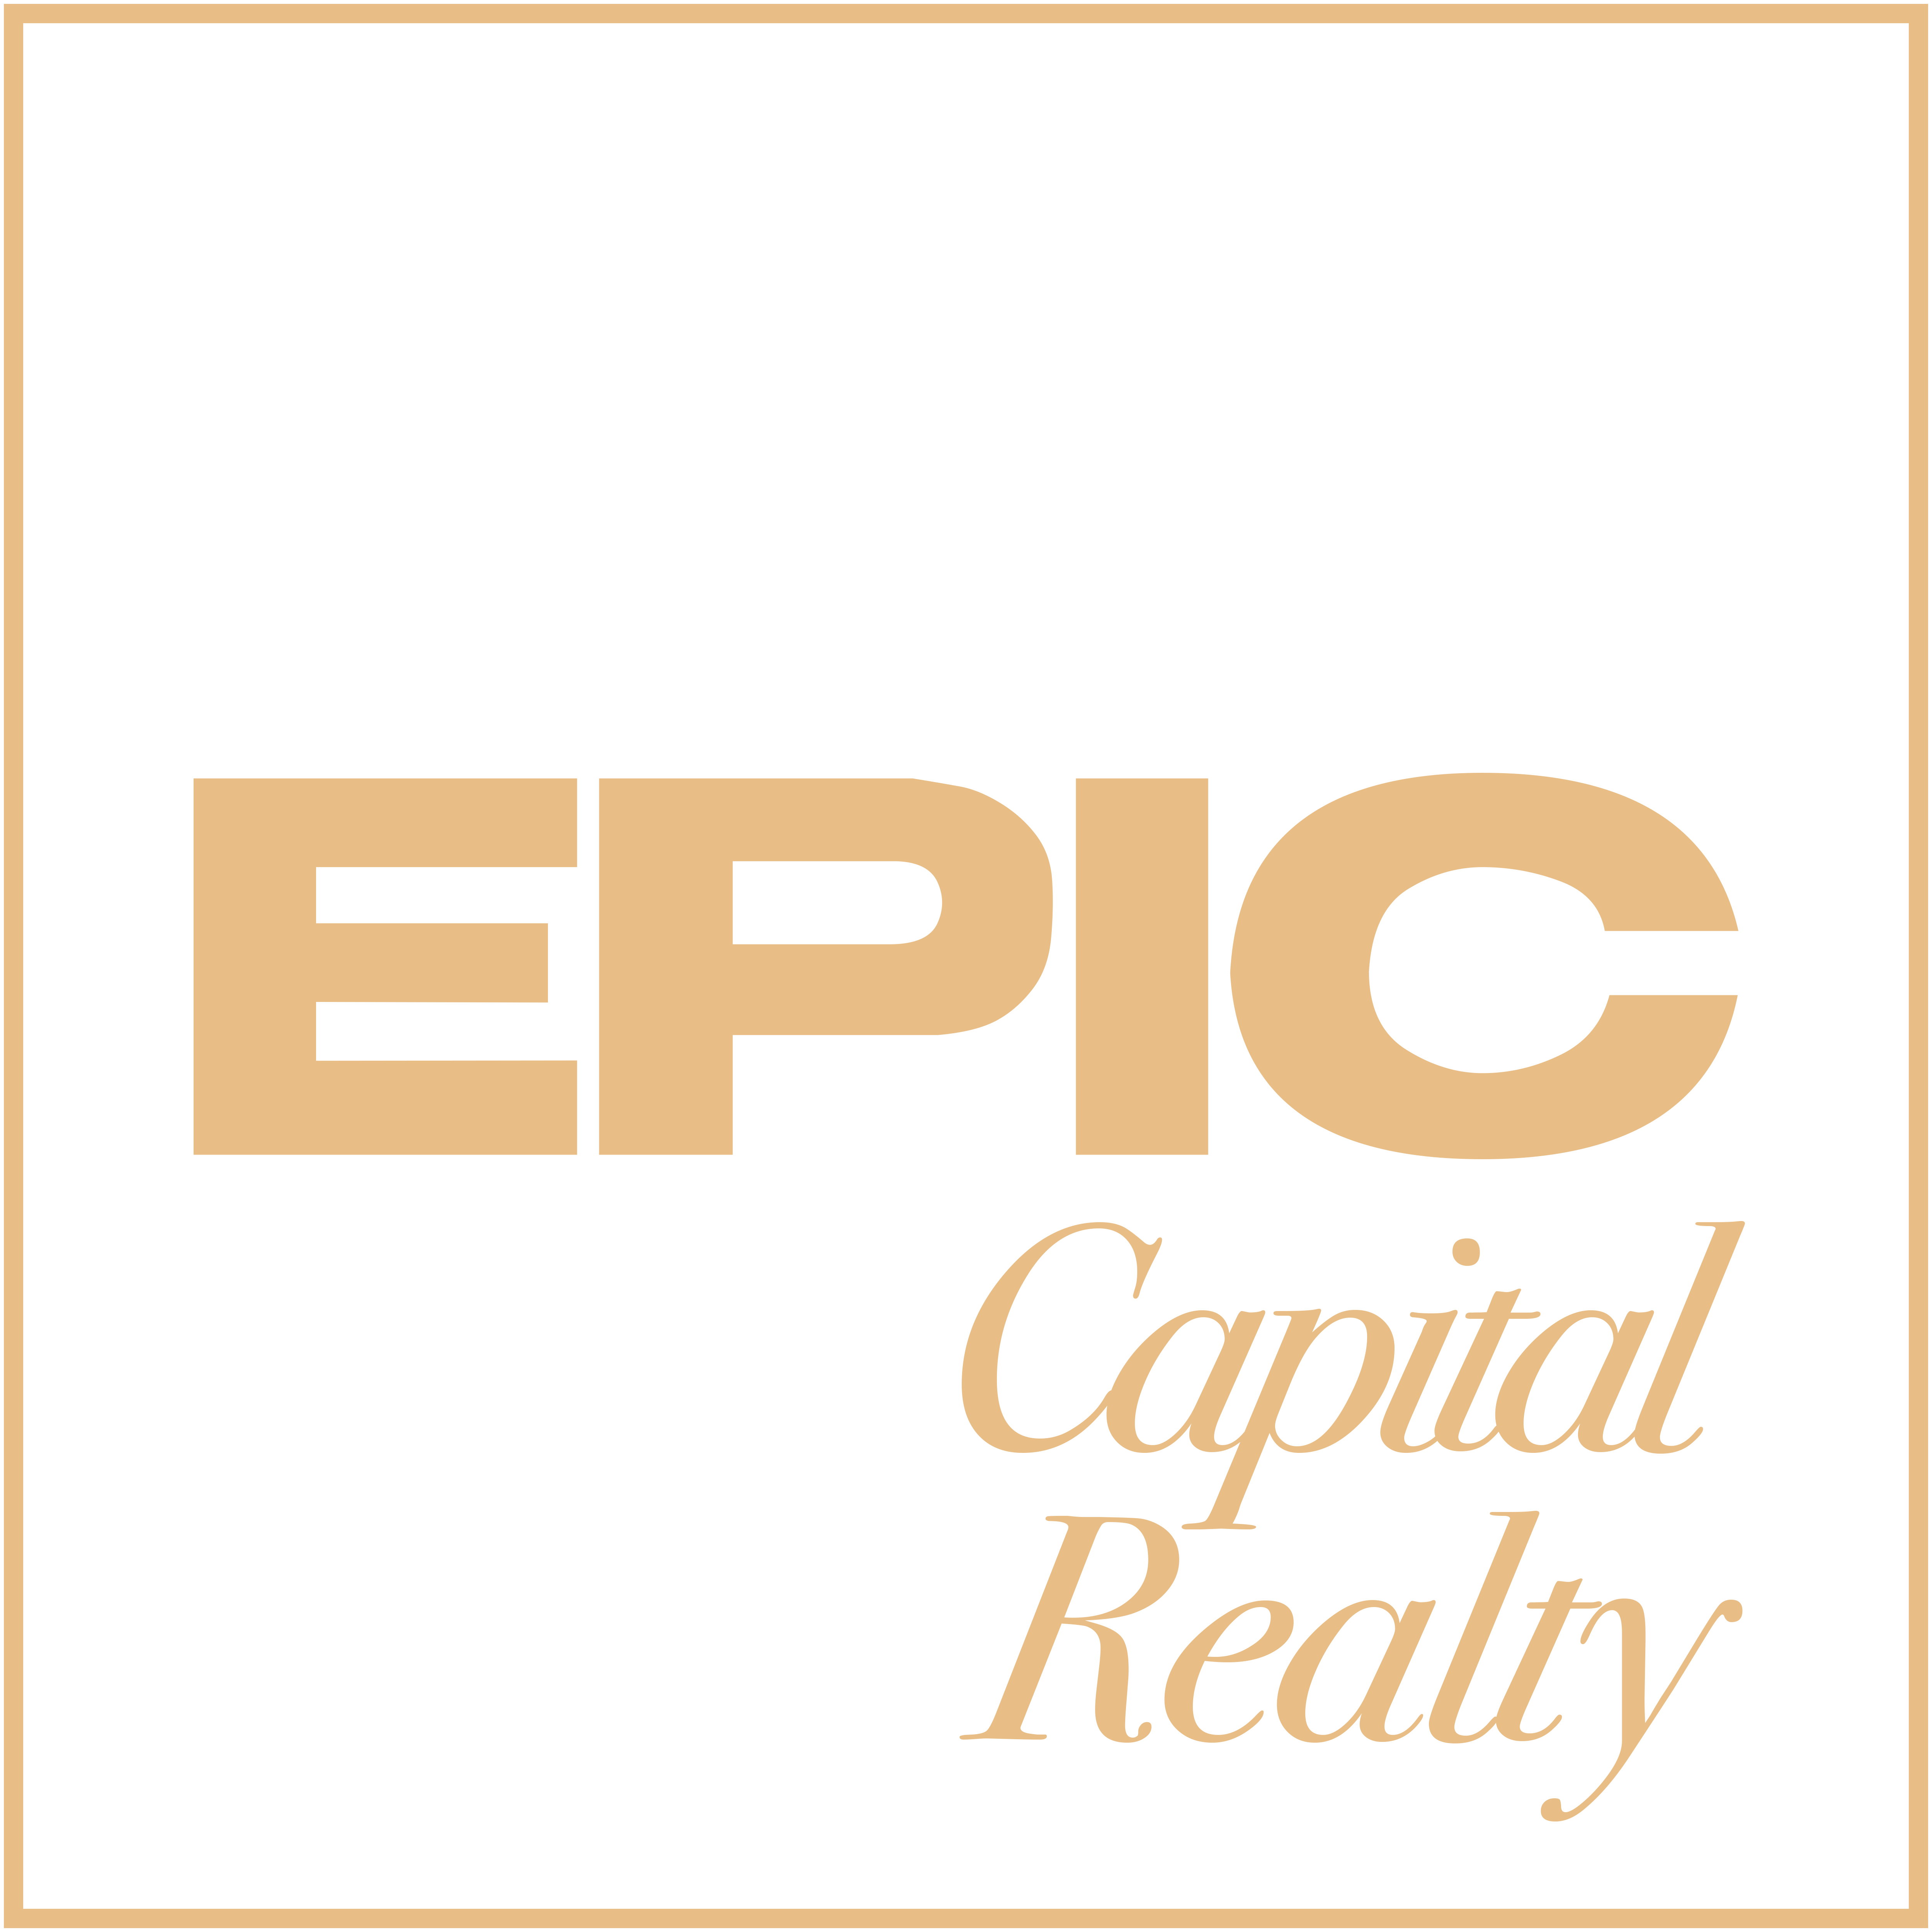 EPIC CAPITAL REALTY